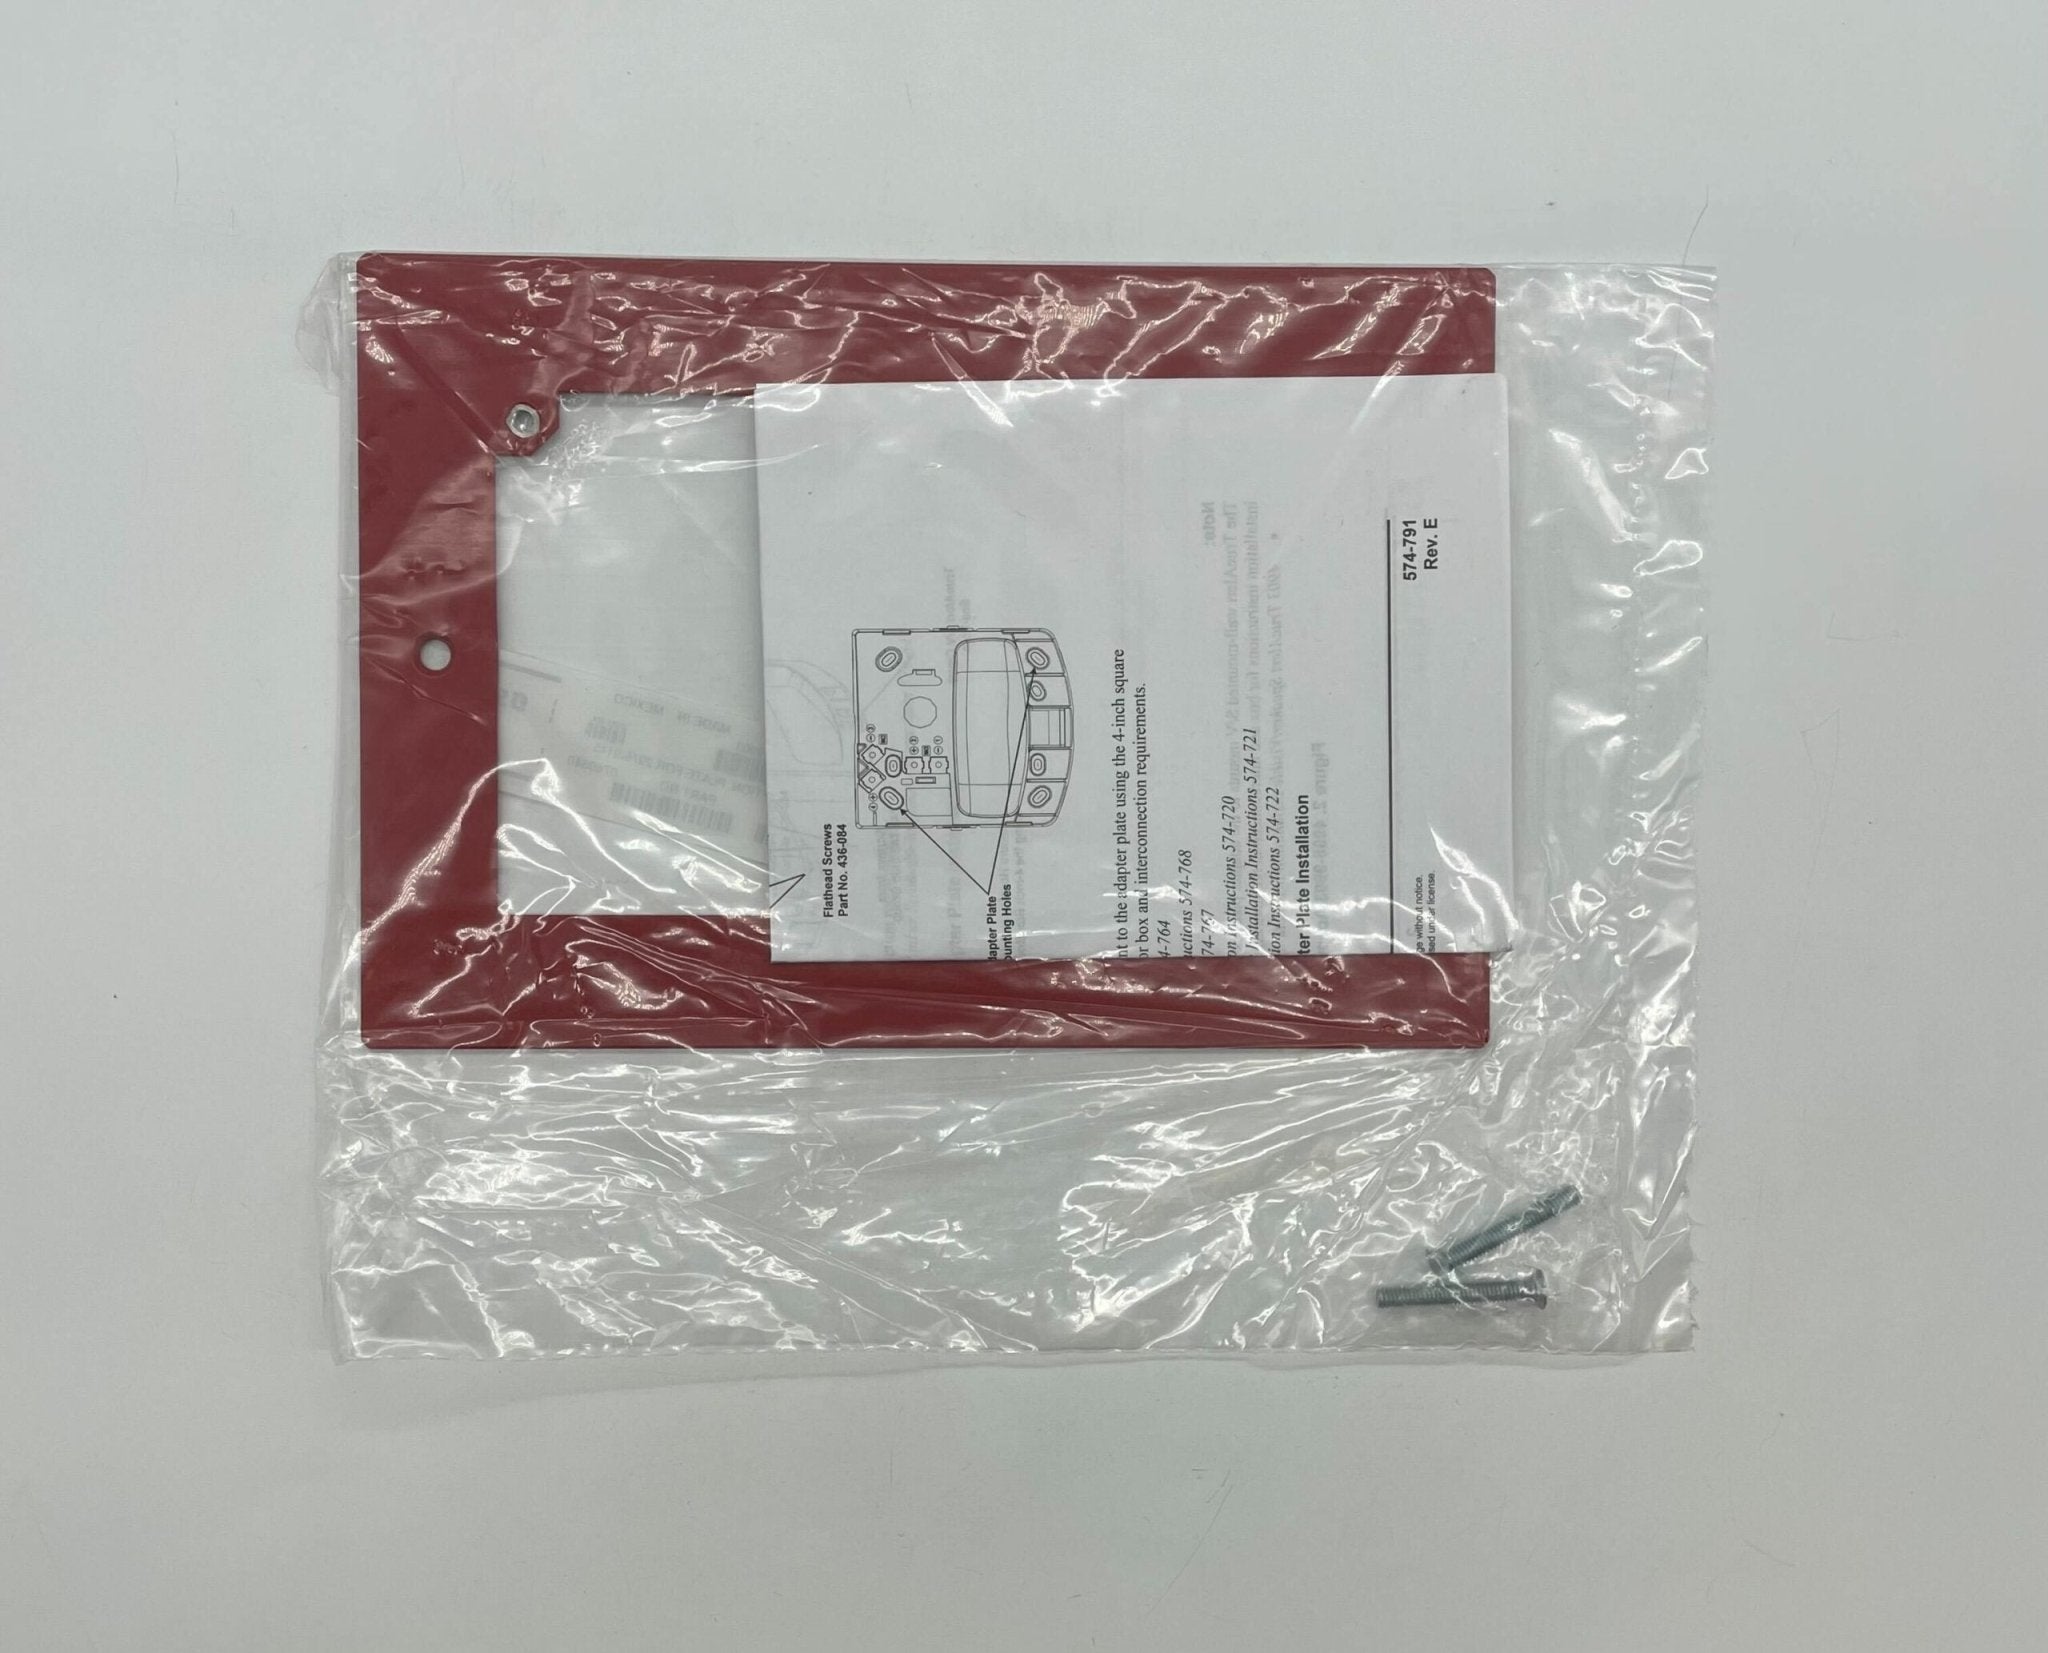 Simplex 4905-9903 Plate For 2975-9145 - The Fire Alarm Supplier